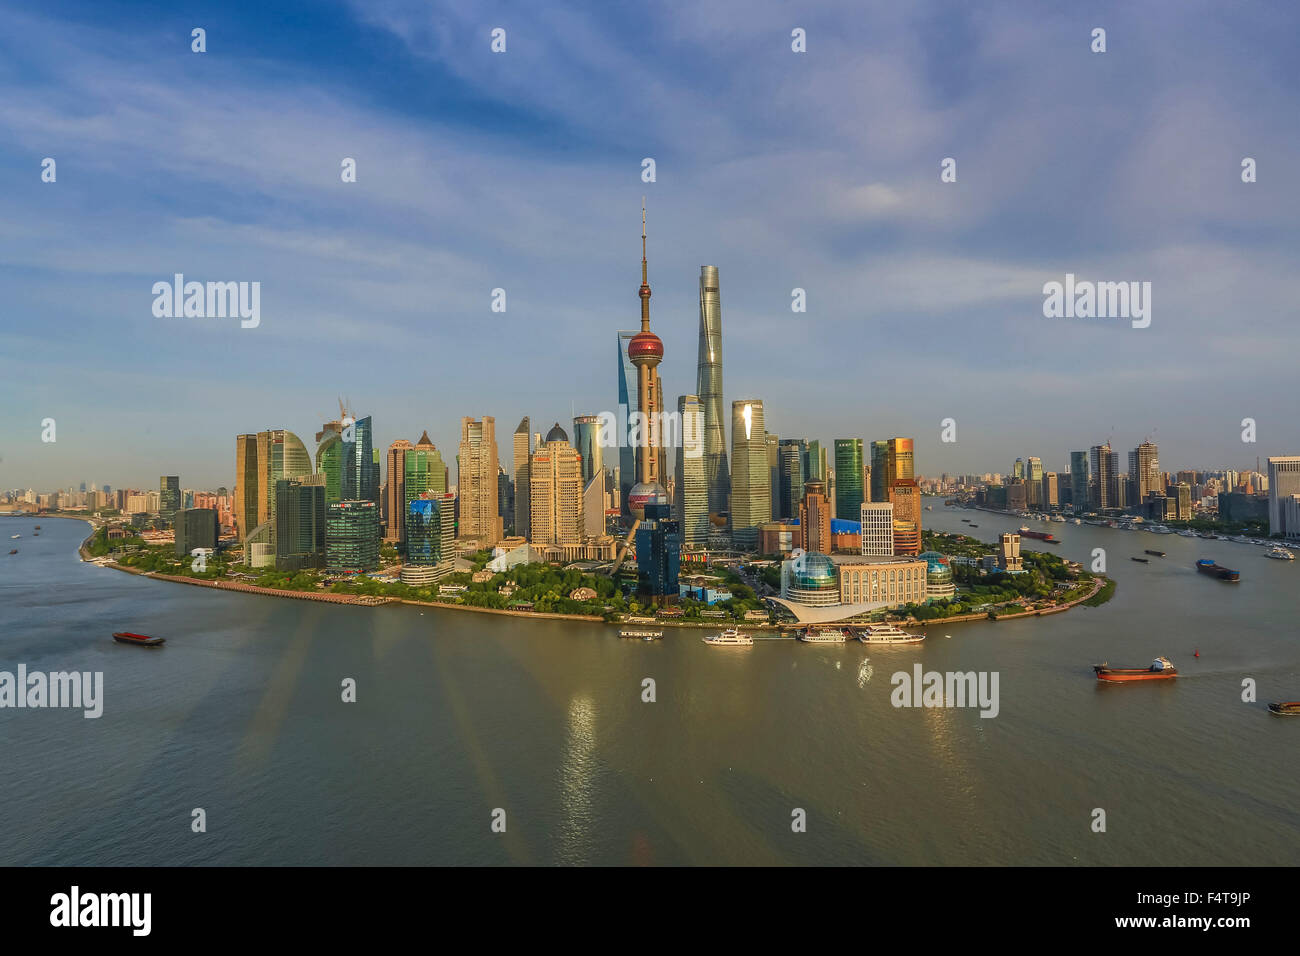 China, Shanghai City, Pudong Skyline, Oriental Pearl, World Financial Center and Shanghai Towers, Huangpu River. Stock Photo